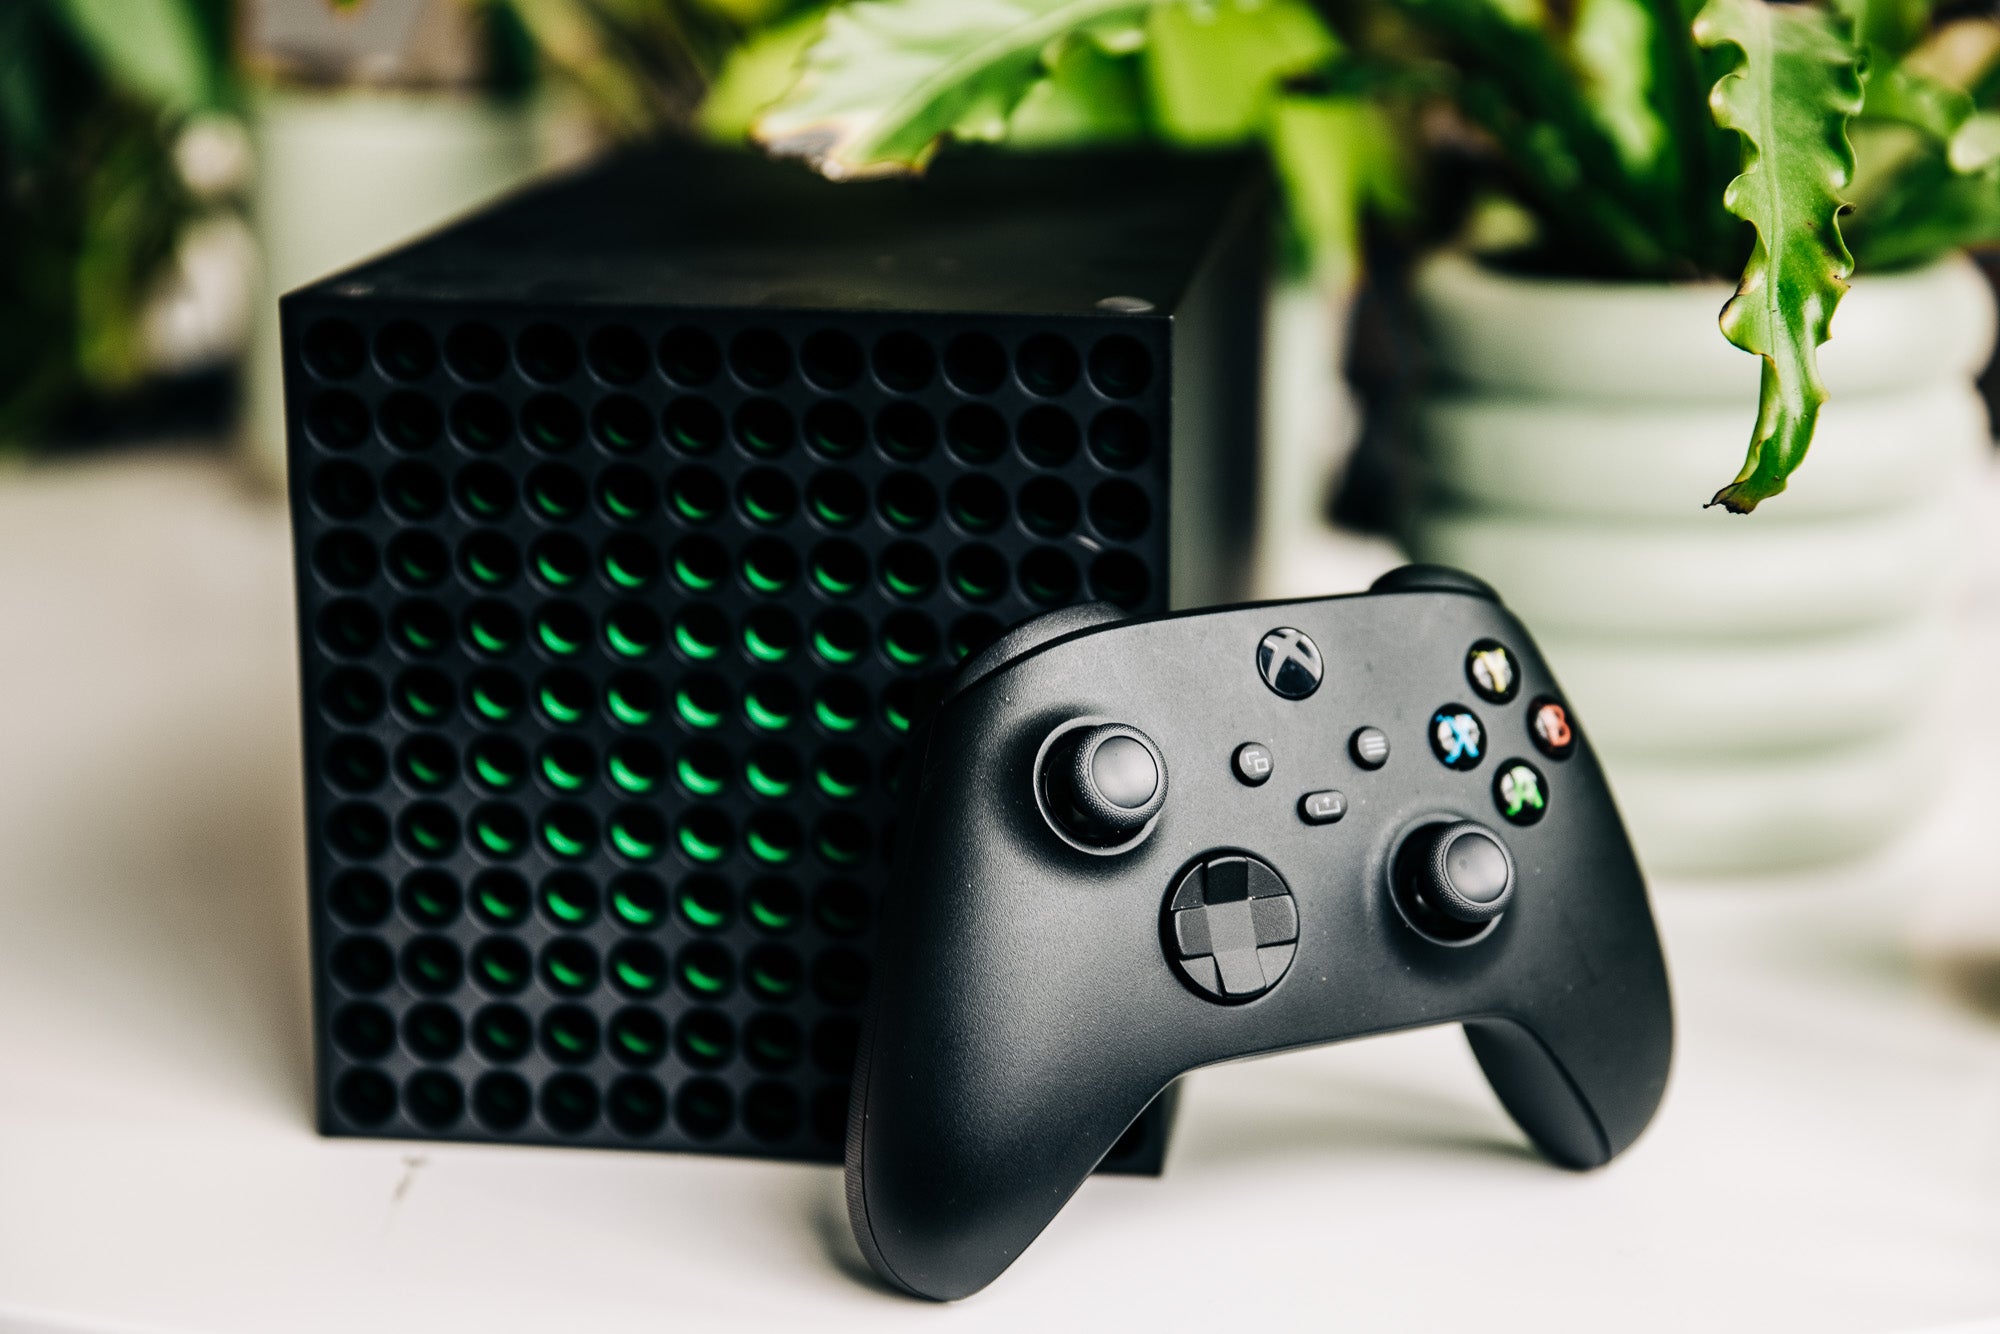 slank kever maat The Xbox Series X offers killer gaming—if your TV can handle it